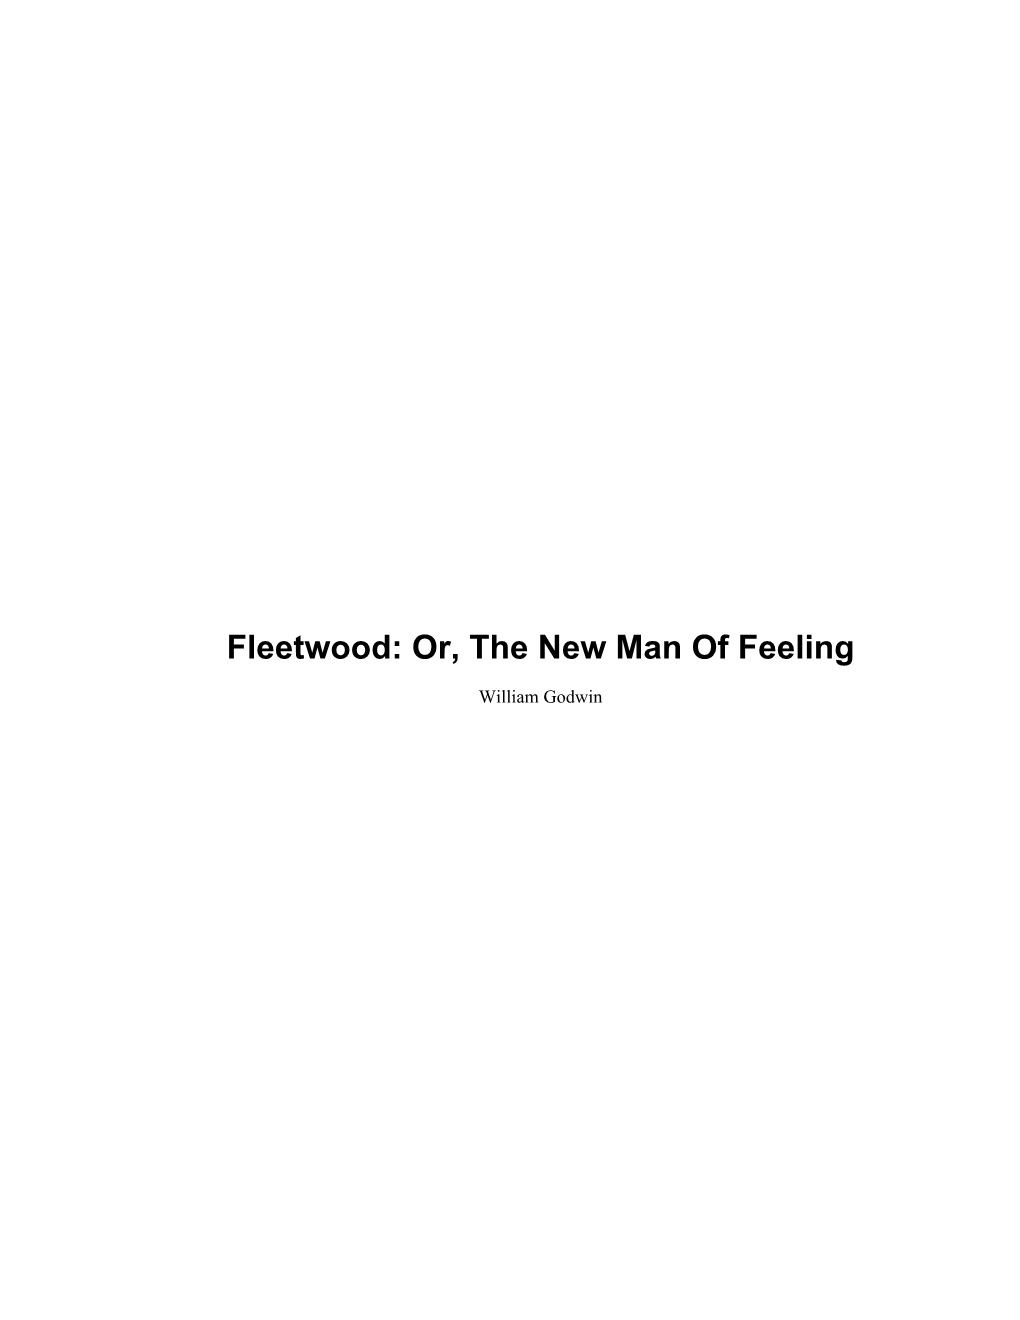 Fleetwood: Or, the New Man of Feeling